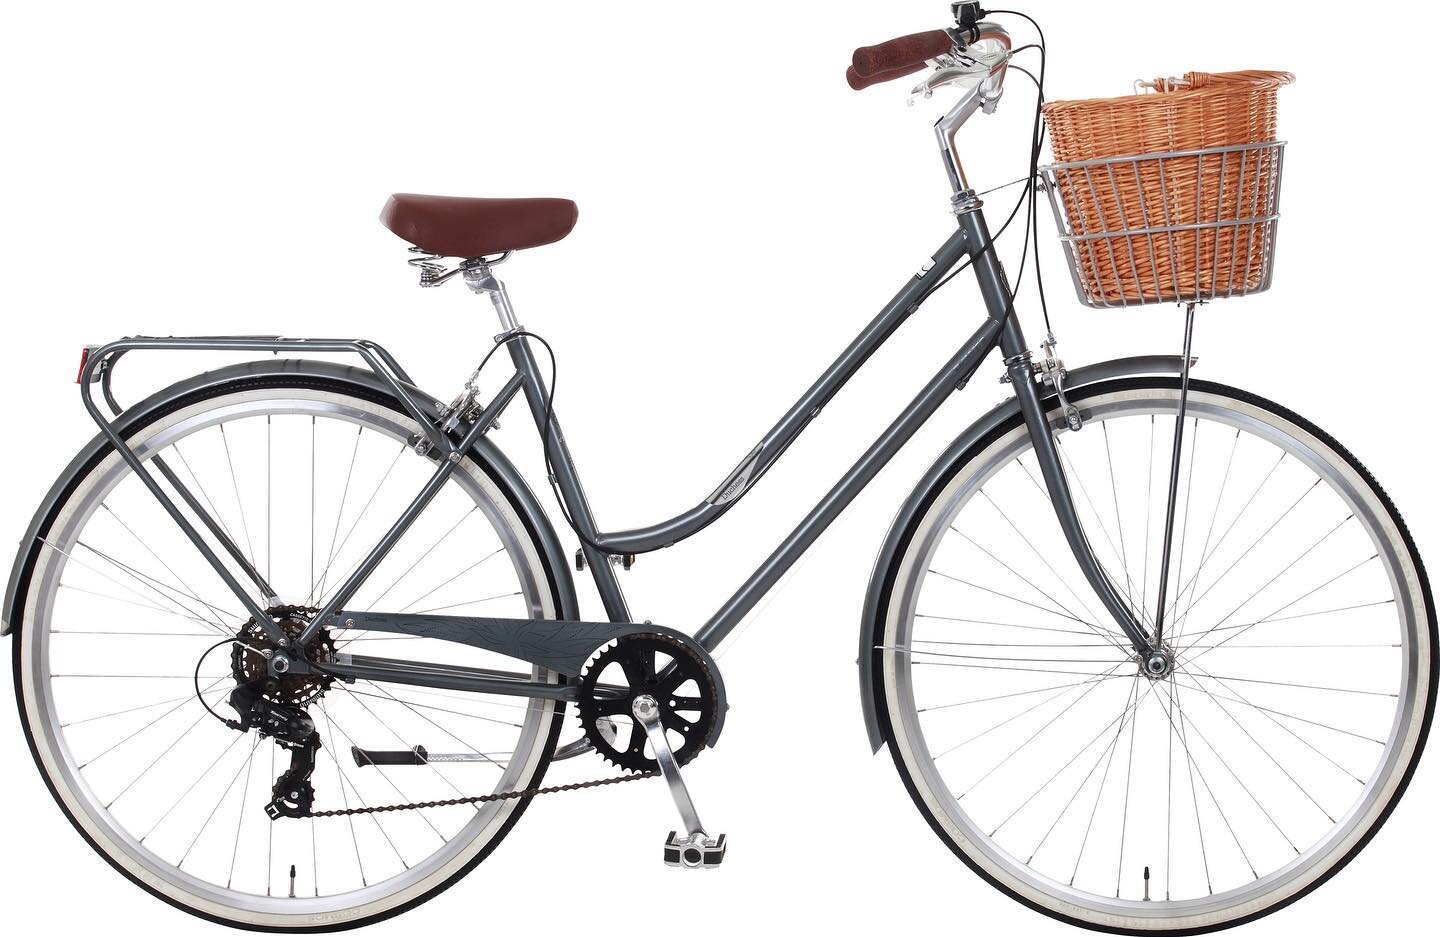 New bikes in! We have two elegant Dawes Duchess Ladies Town bikes. Perfect for cruising the Southwold streets with a bottle of wine in the basket. 

Size: 17&quot; &amp; 19&quot; Frame
Extras: Rattan basket, steel frame

&pound;430
 
2 x AVAILABLE

C